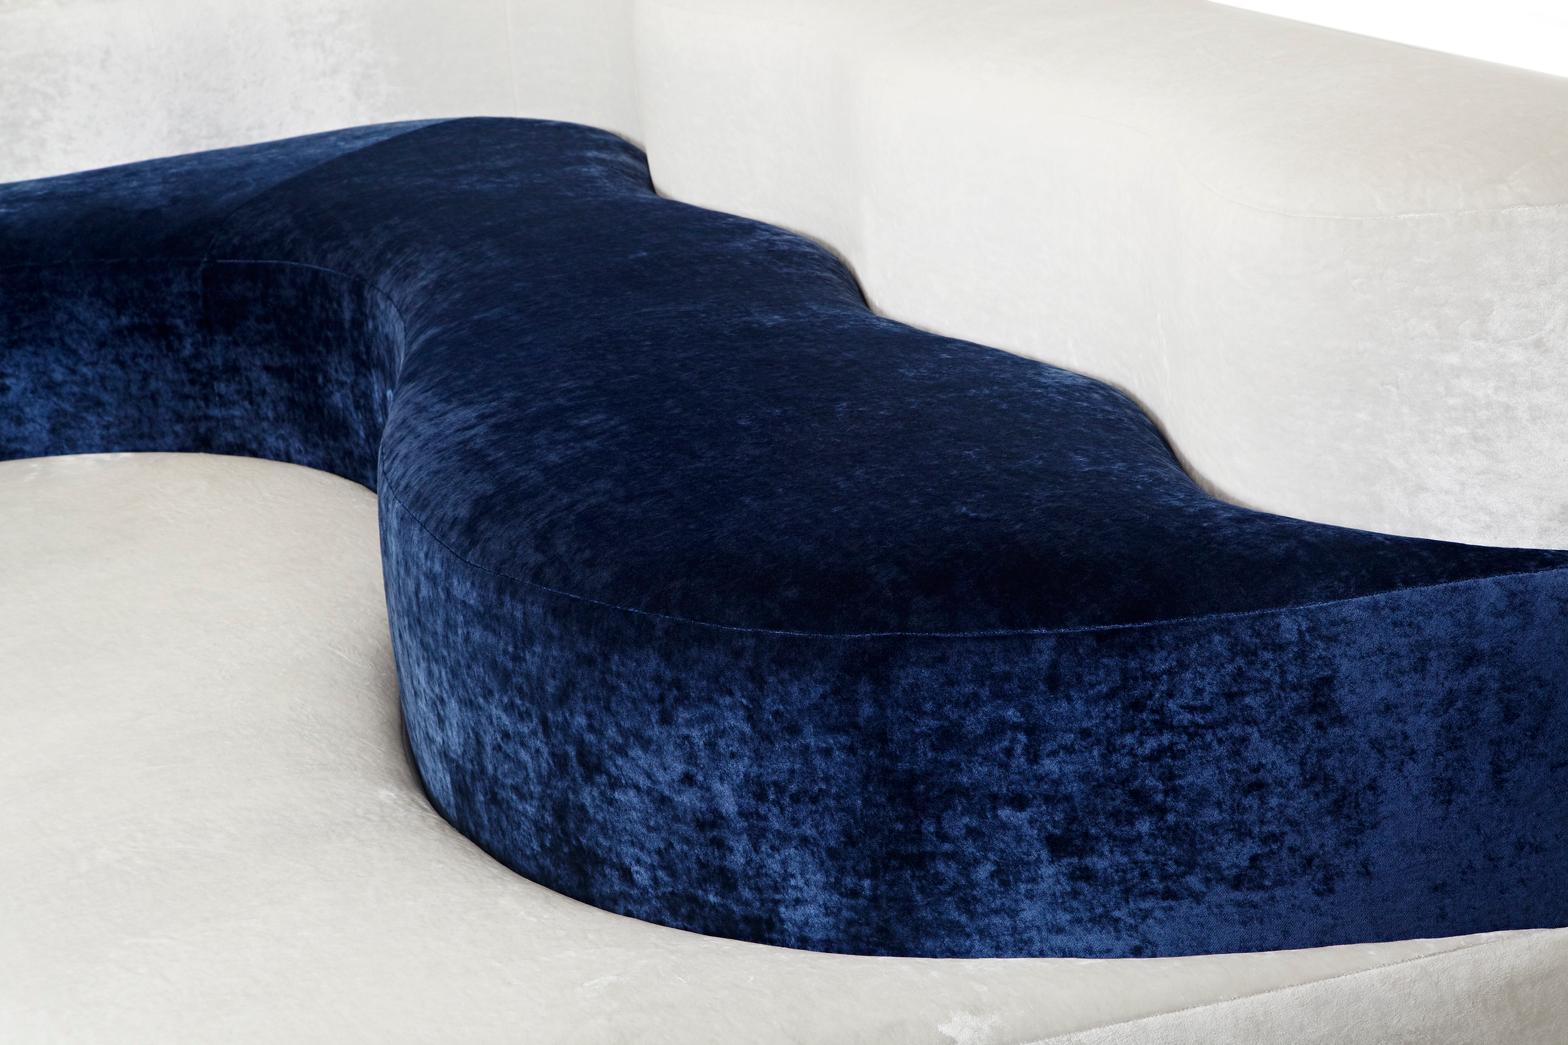 The Holas banquette creates a sleek and modern seating arrangement with its beautifully sculpted waving shape. Upholstered in luxurious velvet and deeply padded for comfort, the it is sure to provide countless hours of comfort.